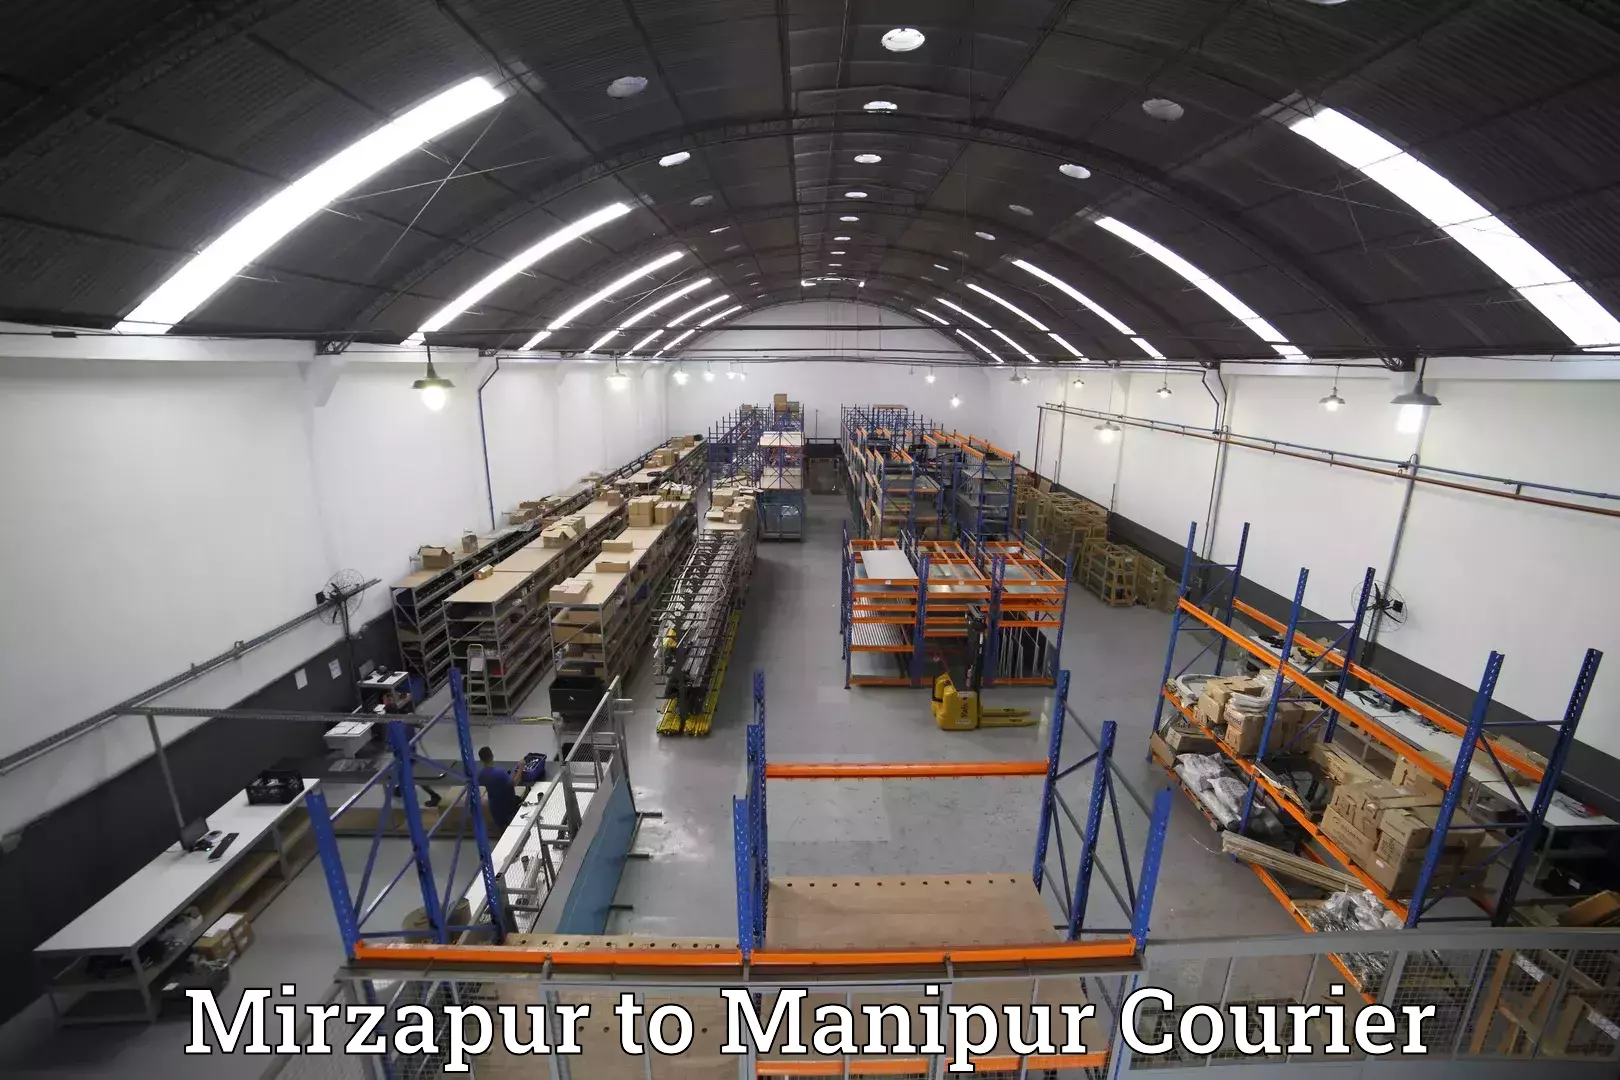 Luggage shipment specialists Mirzapur to Manipur